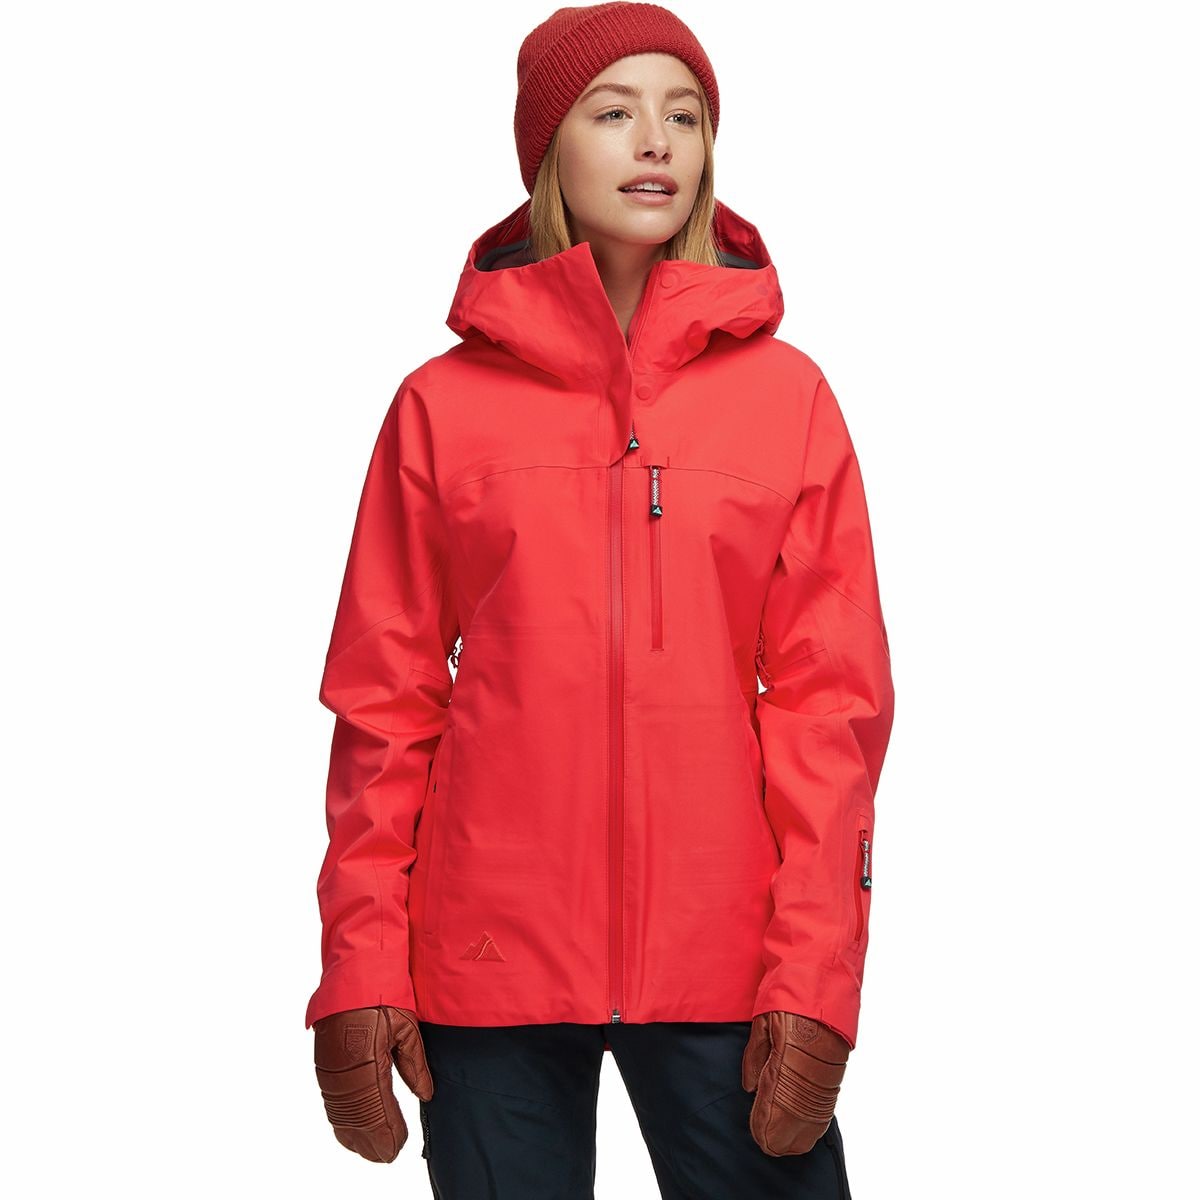 Strafe Outerwear Meadow Jacket - Women's Candy Red